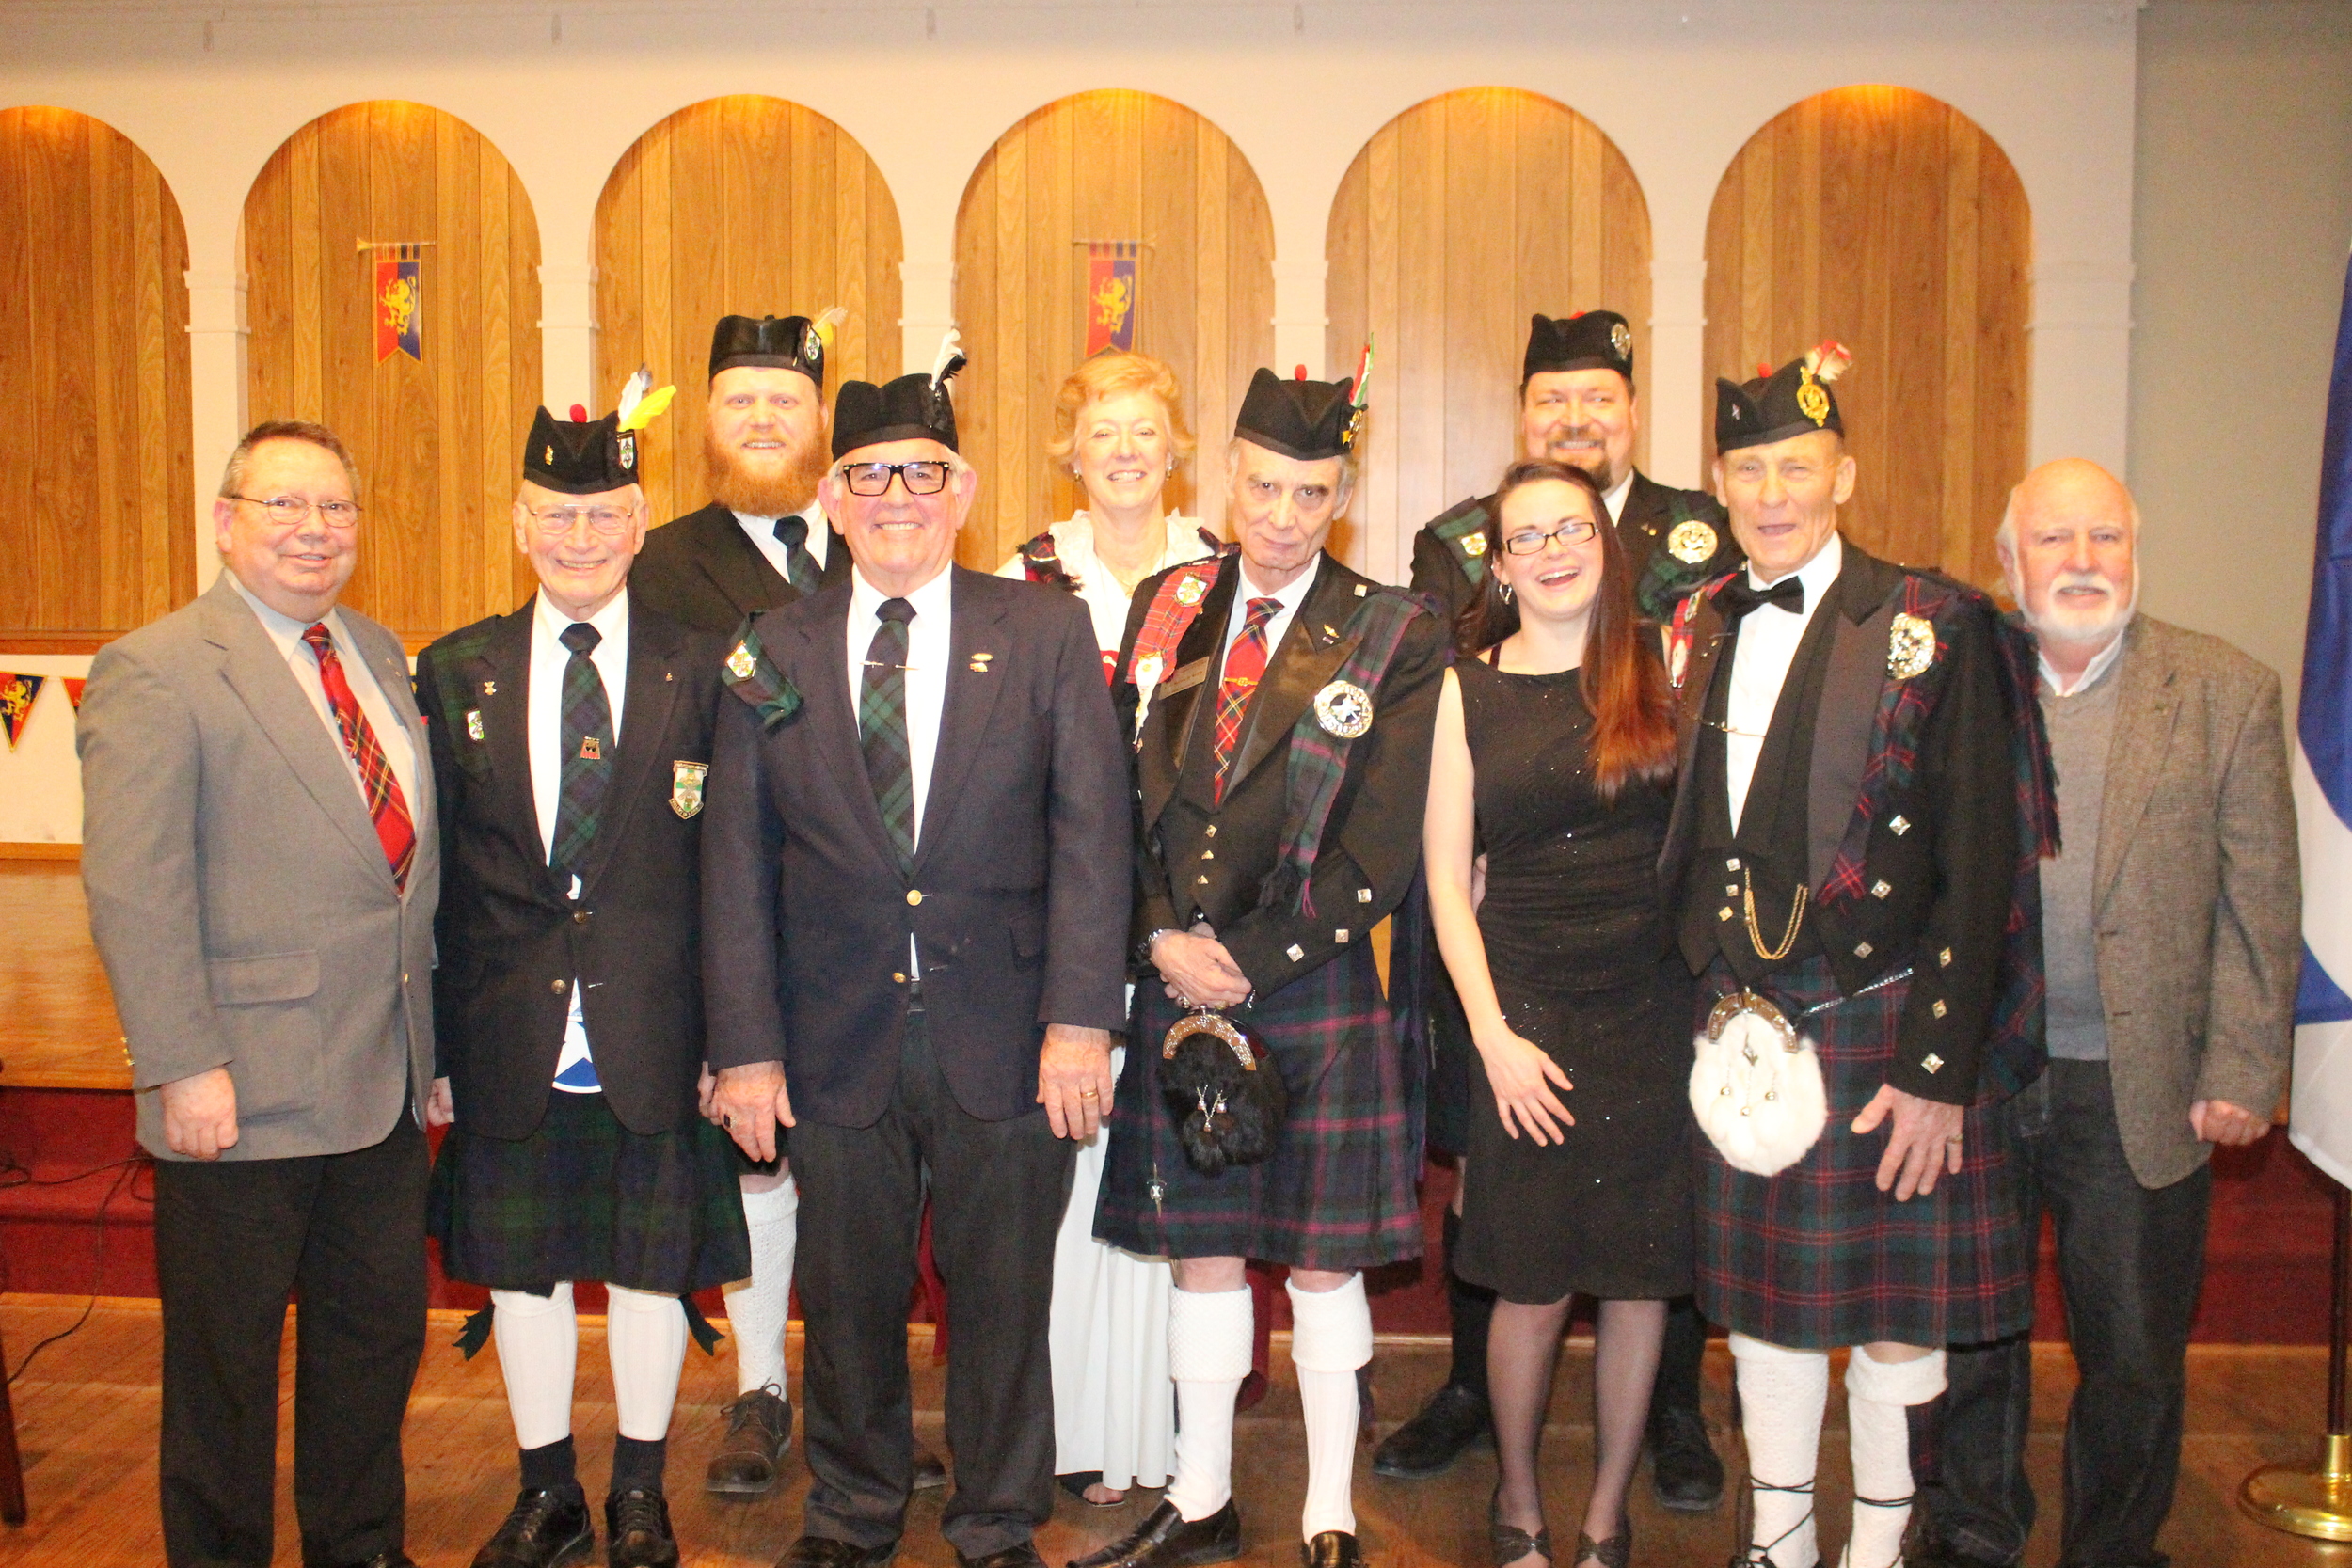 The Knights of St. Andrew Hosted the Evening